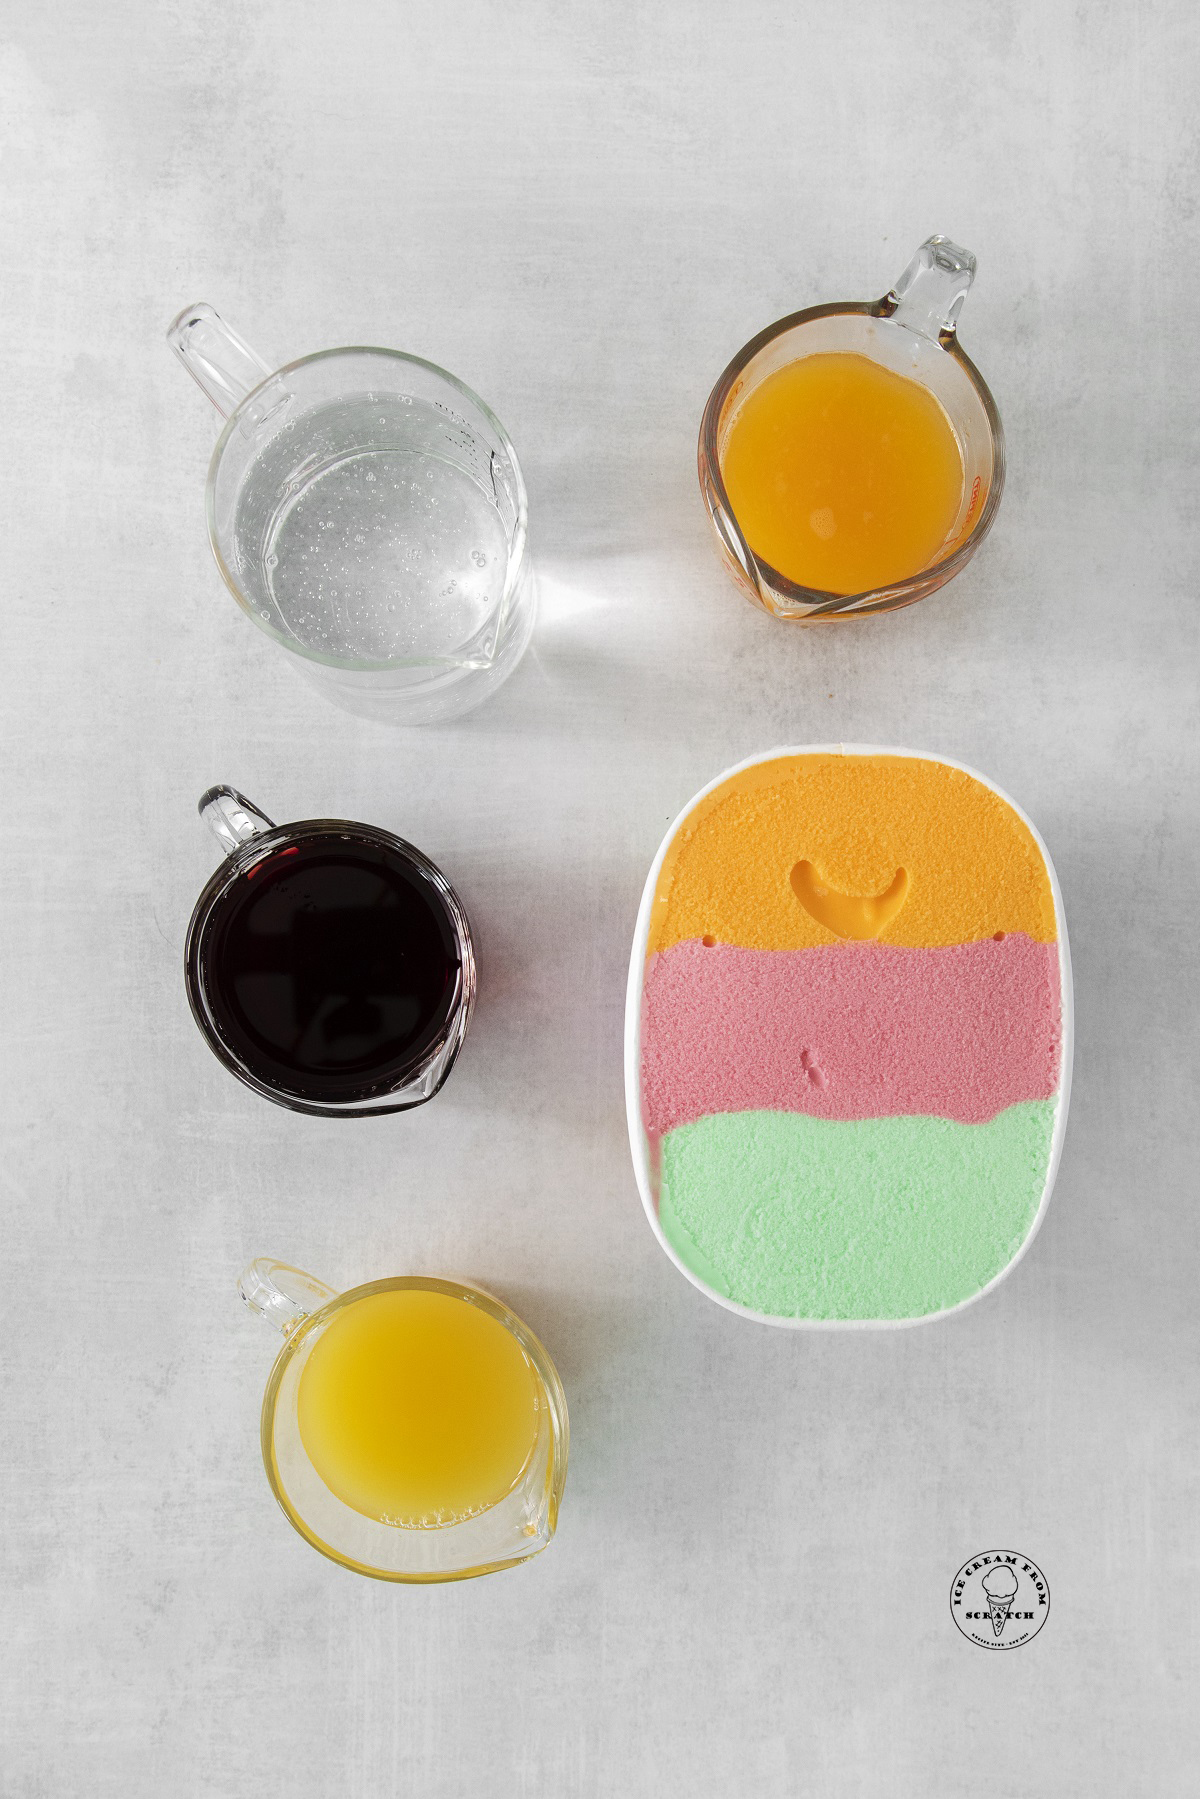 The ingredients for the sherbet punch, including juice, soda, and rainbow sherbet, arranged on a counter and viewed from above.